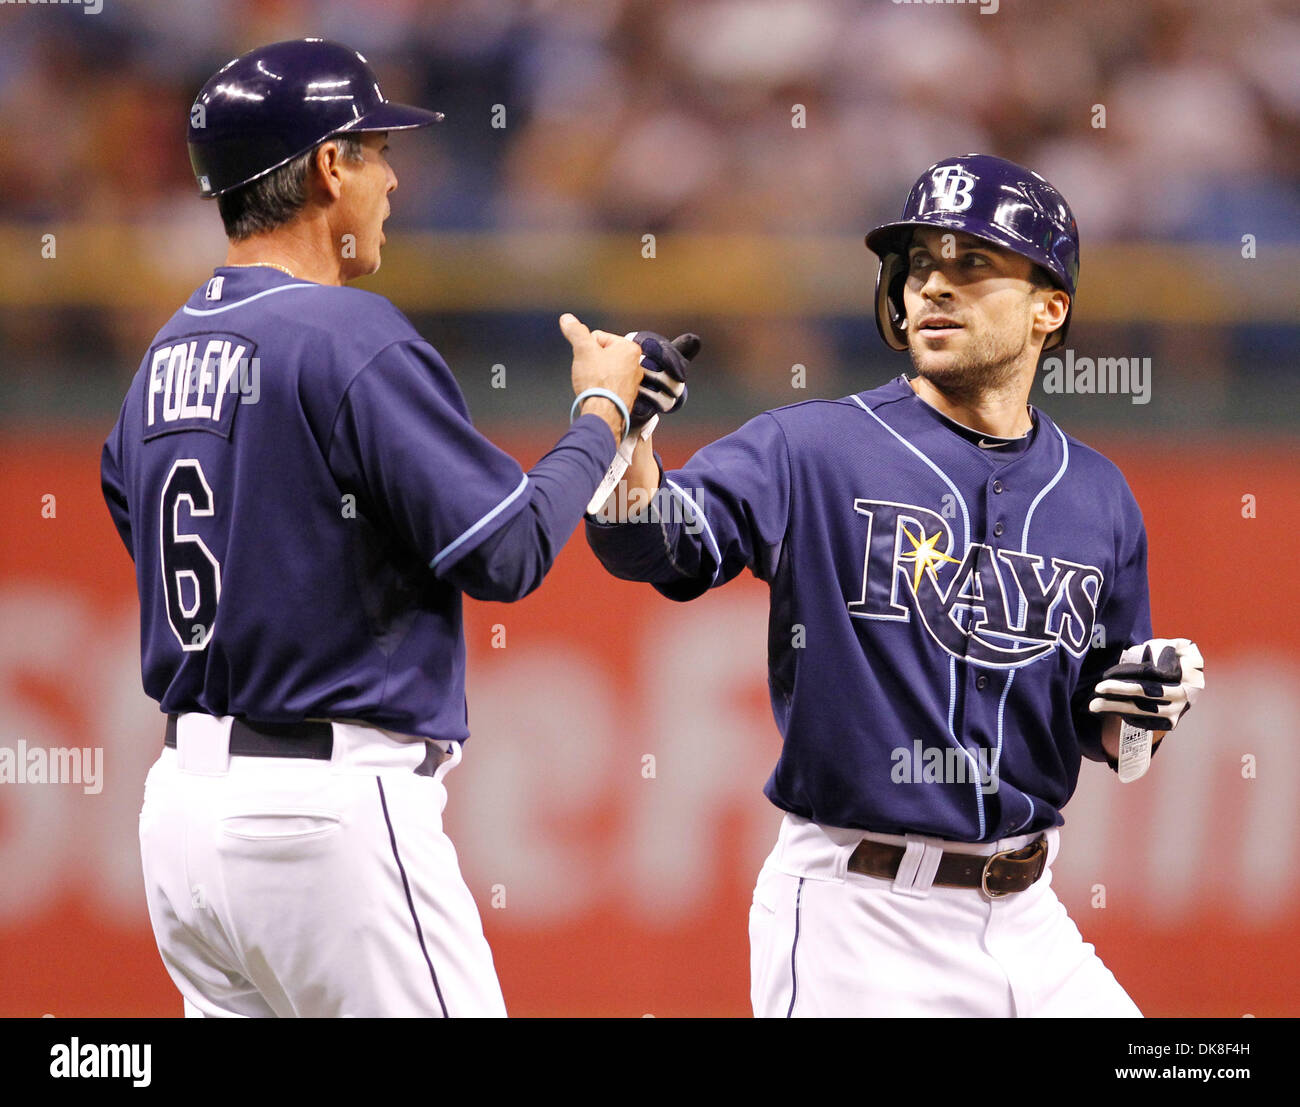 July 21, 2011 - St. Petersburg, Florida, U.S. - Third Base Coach TOM FOLEY congratulates SAM FULD on his RBI triple in the fifth which gave the Rays a 2-0 lead over the New York Yankees at Tropicana Field. (Credit Image: © James Borchuck/St. Petersburg Times/ZUMAPRESS.com) Stock Photo